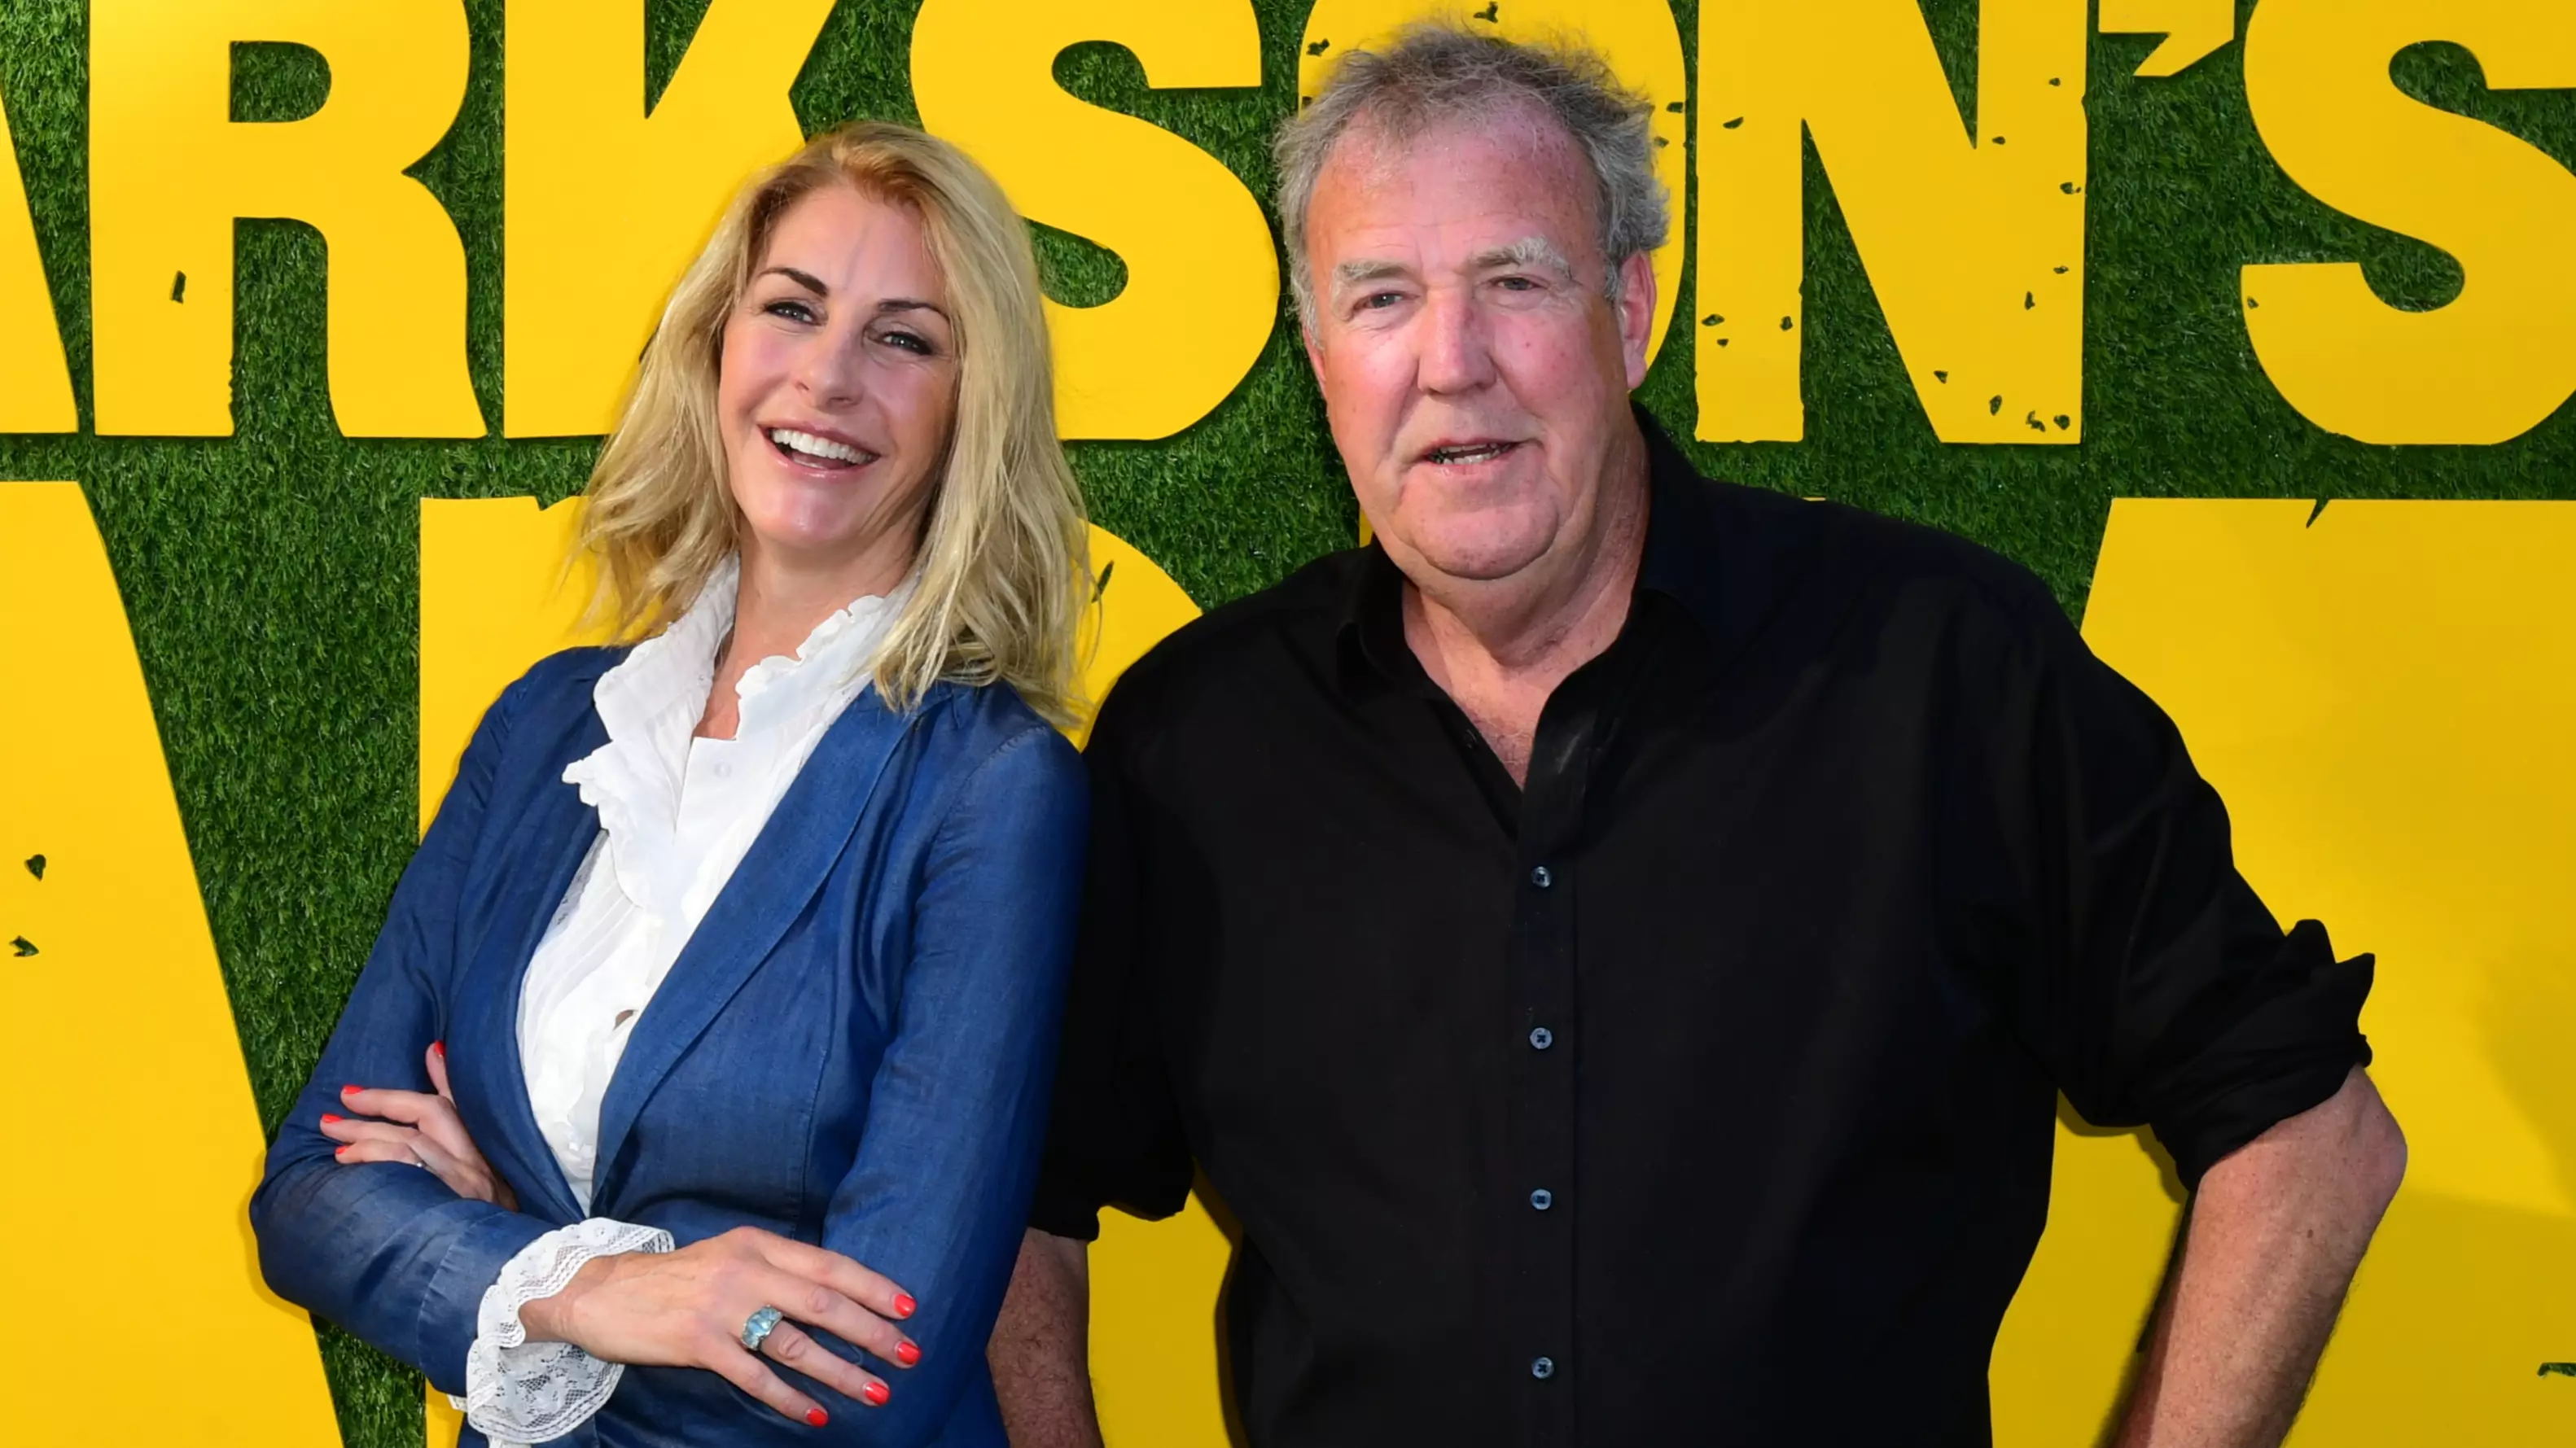 Who Is Jeremy Clarkson’s Girlfriend And Who Was He Married To Before?